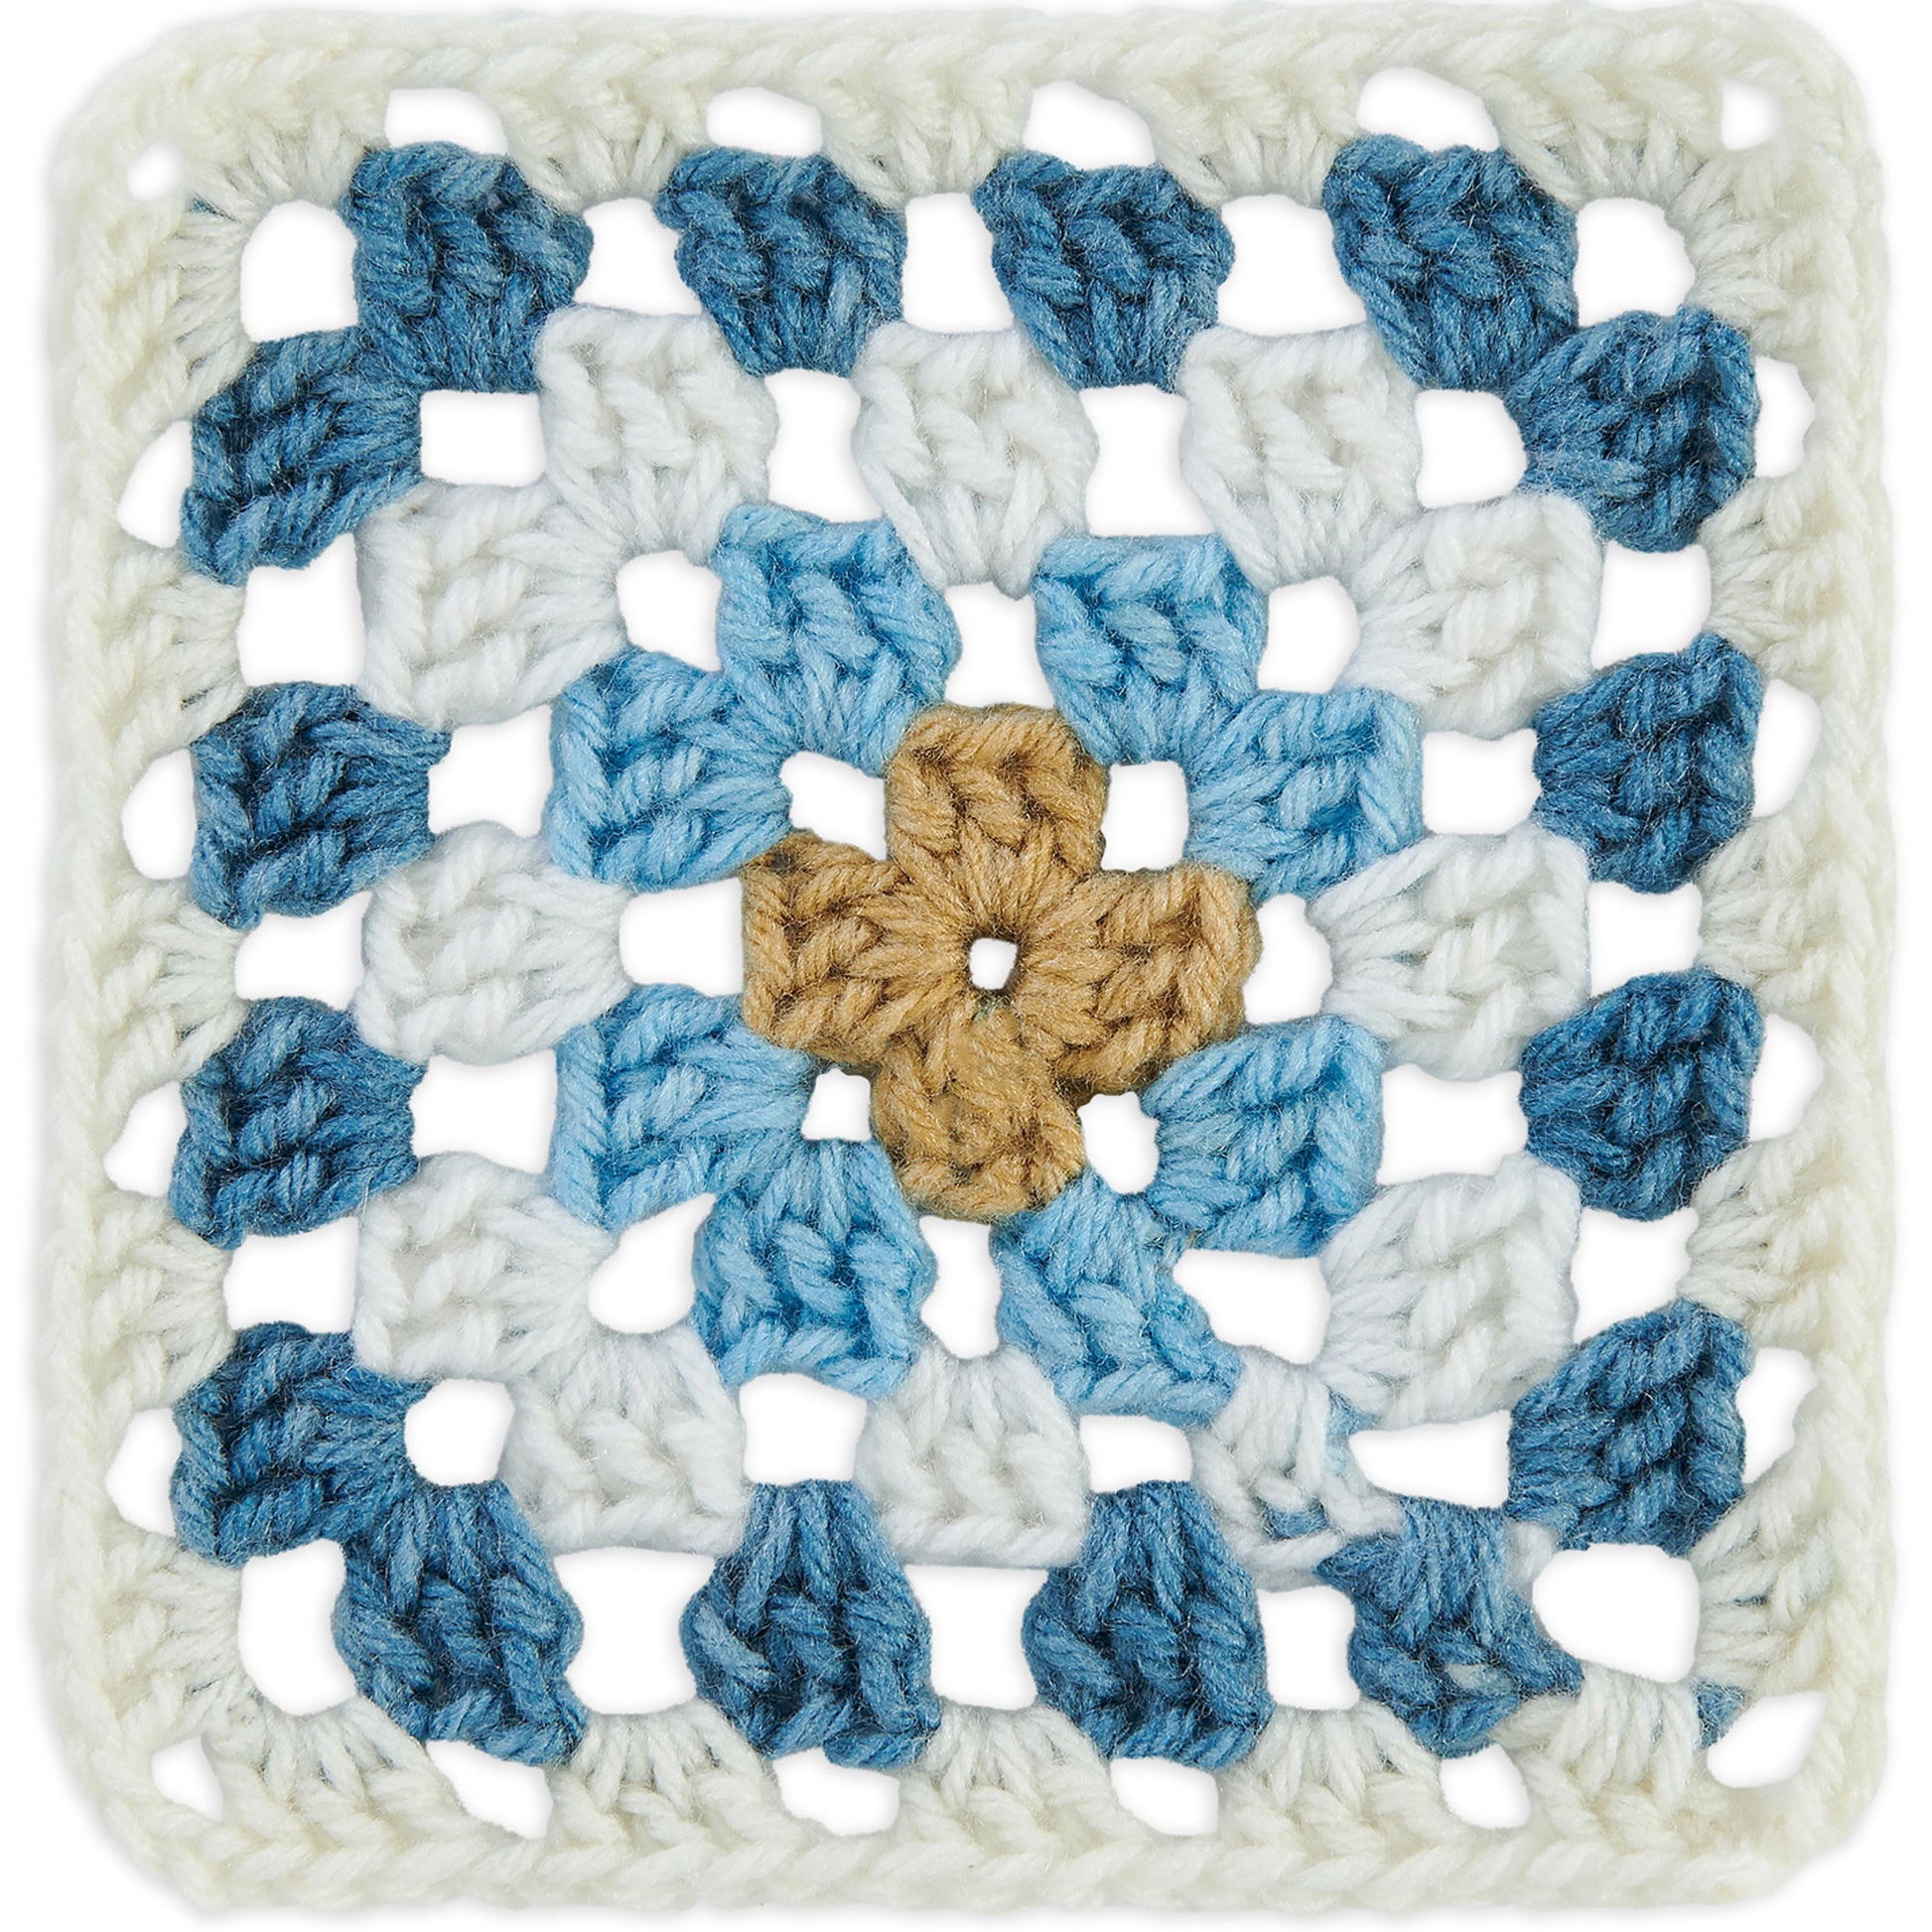 PRODUCT REVIEW: Red Heart- ALL IN ONE Granny Square!! 